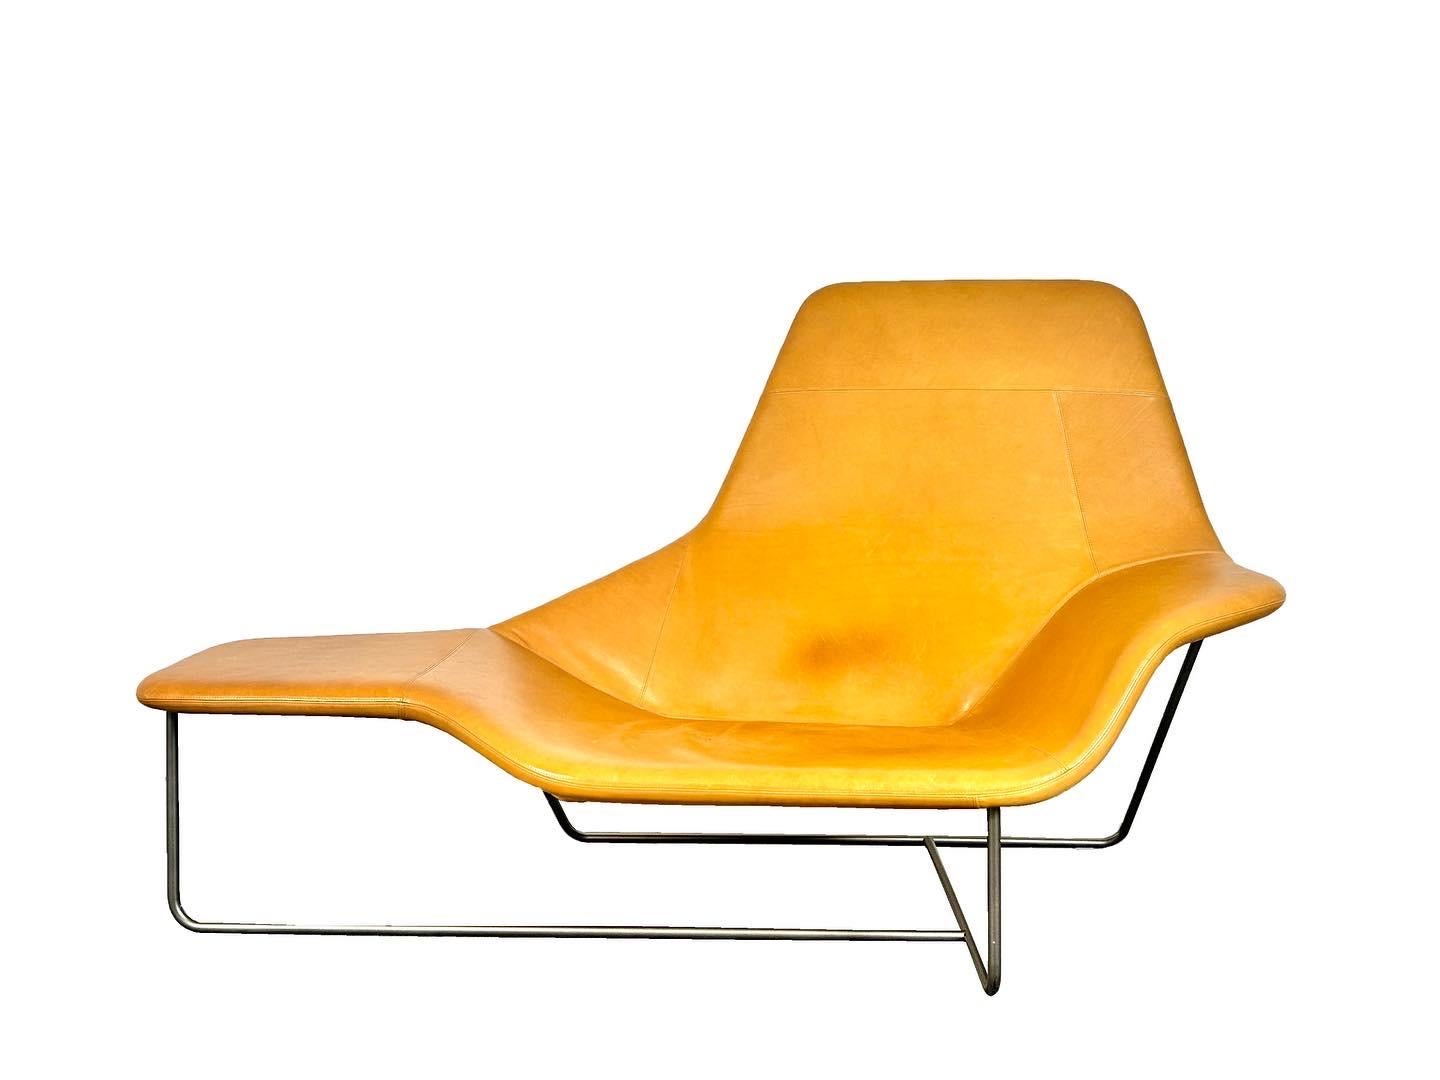 Zanotta Lama lounge chair, in beautiful natural leather upholstery.

Designed by Ludovica & Roberto Palomba in 2006, manufactured by Zanotta, Italy ca. 2007.

Varnished steel frame, leather, self-exstinguishing polyurethane foam